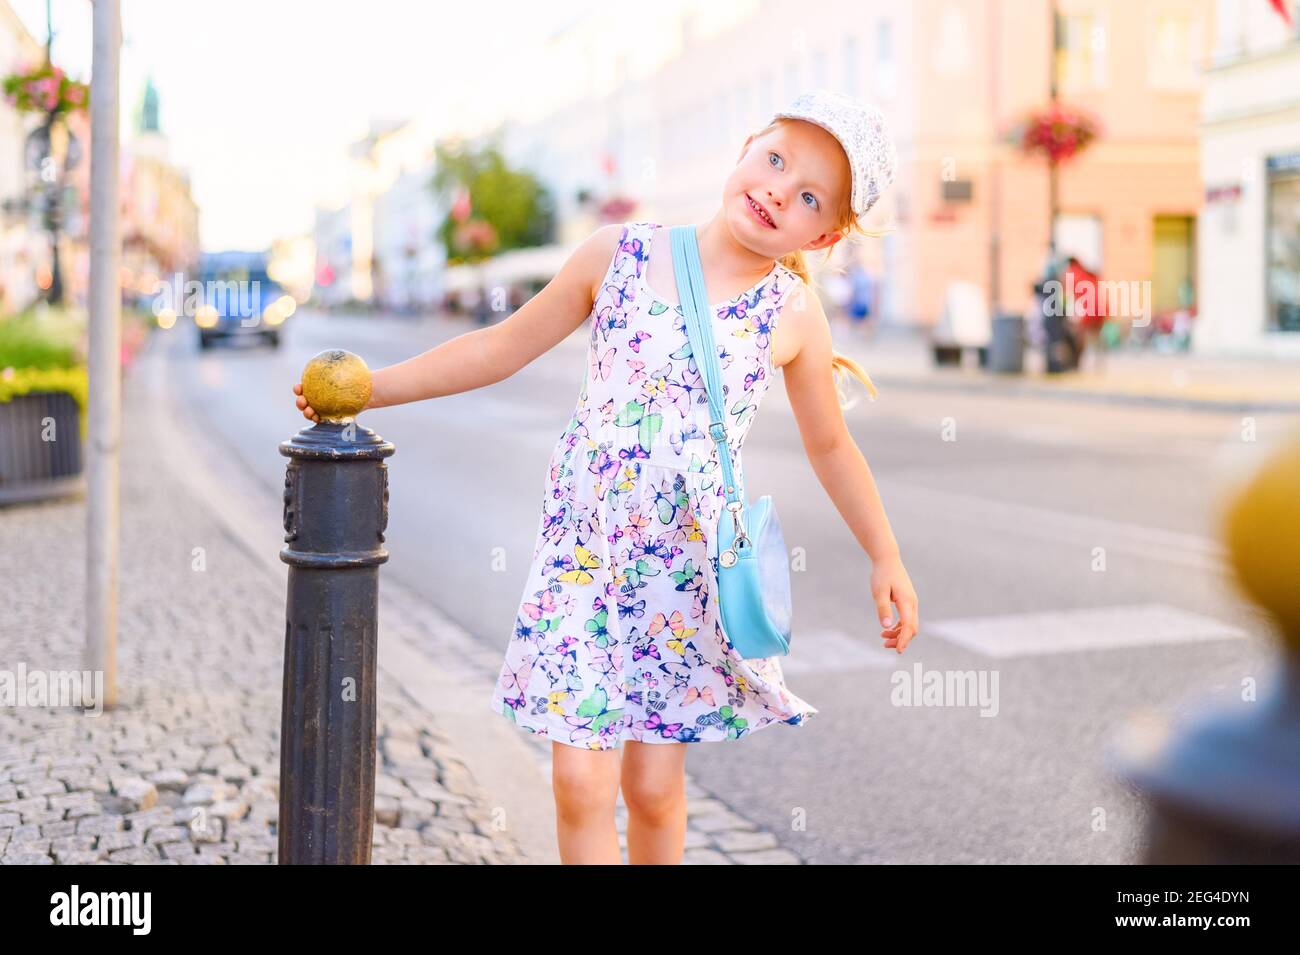 little girl in a dress walking and enjoying outdoor on a city street in a summer day Stock Photo